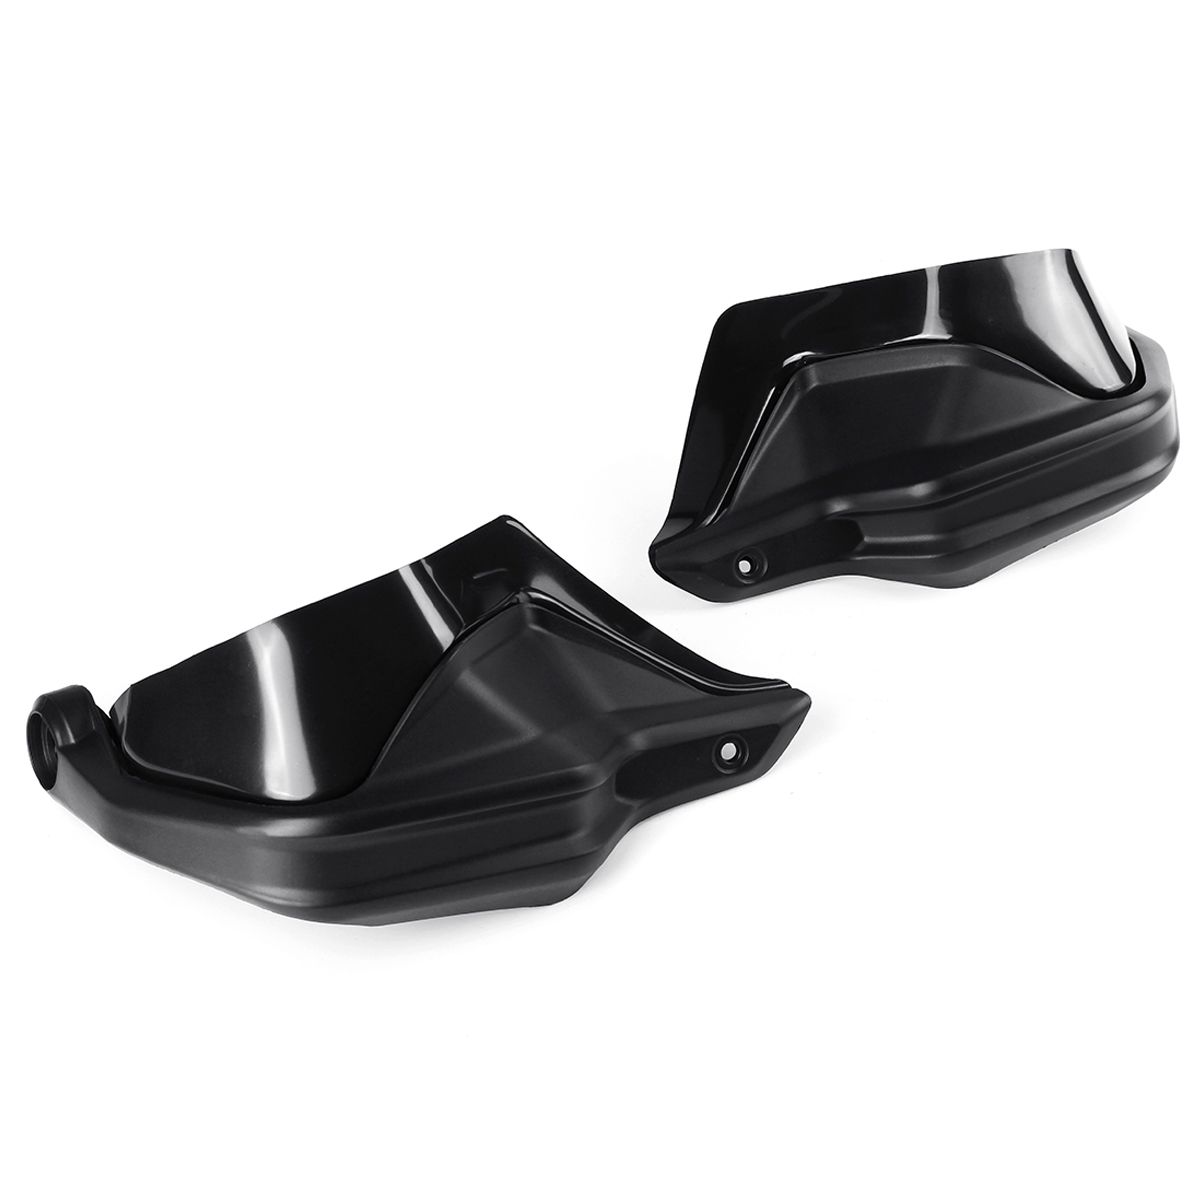 New Handlebar Handguard Extension Shield Protector For BMW R1200GS ...